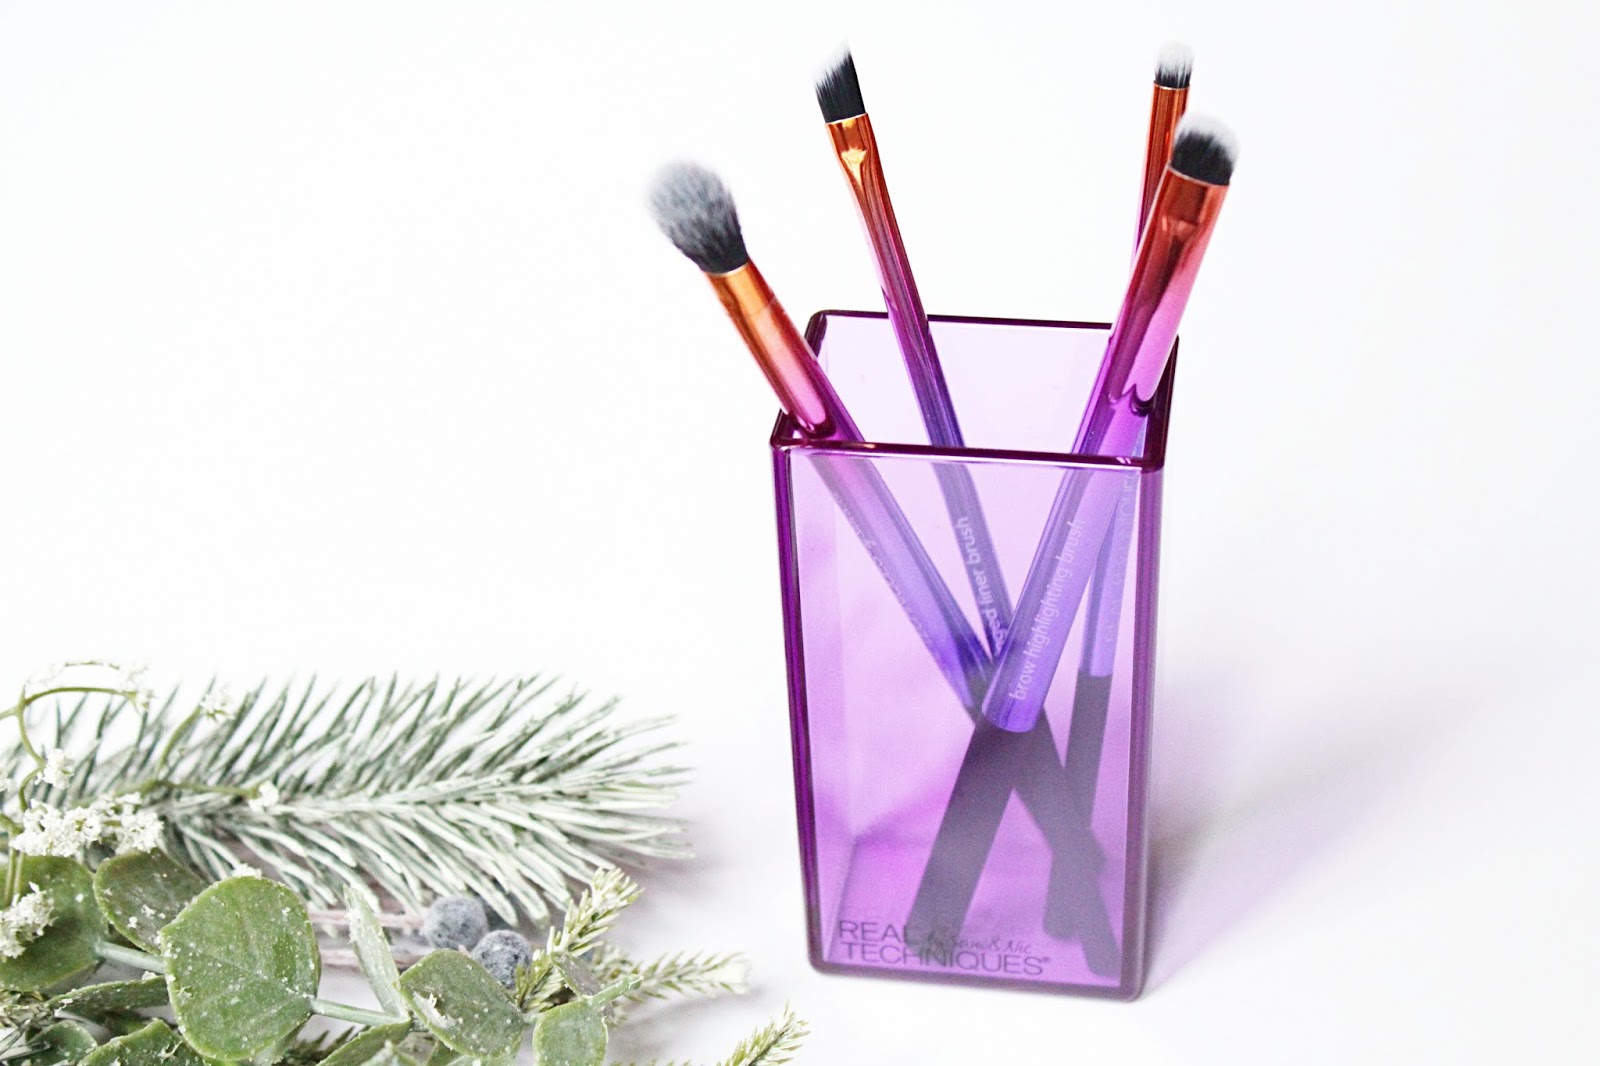 Real Techniques Christmas Brush Sets 